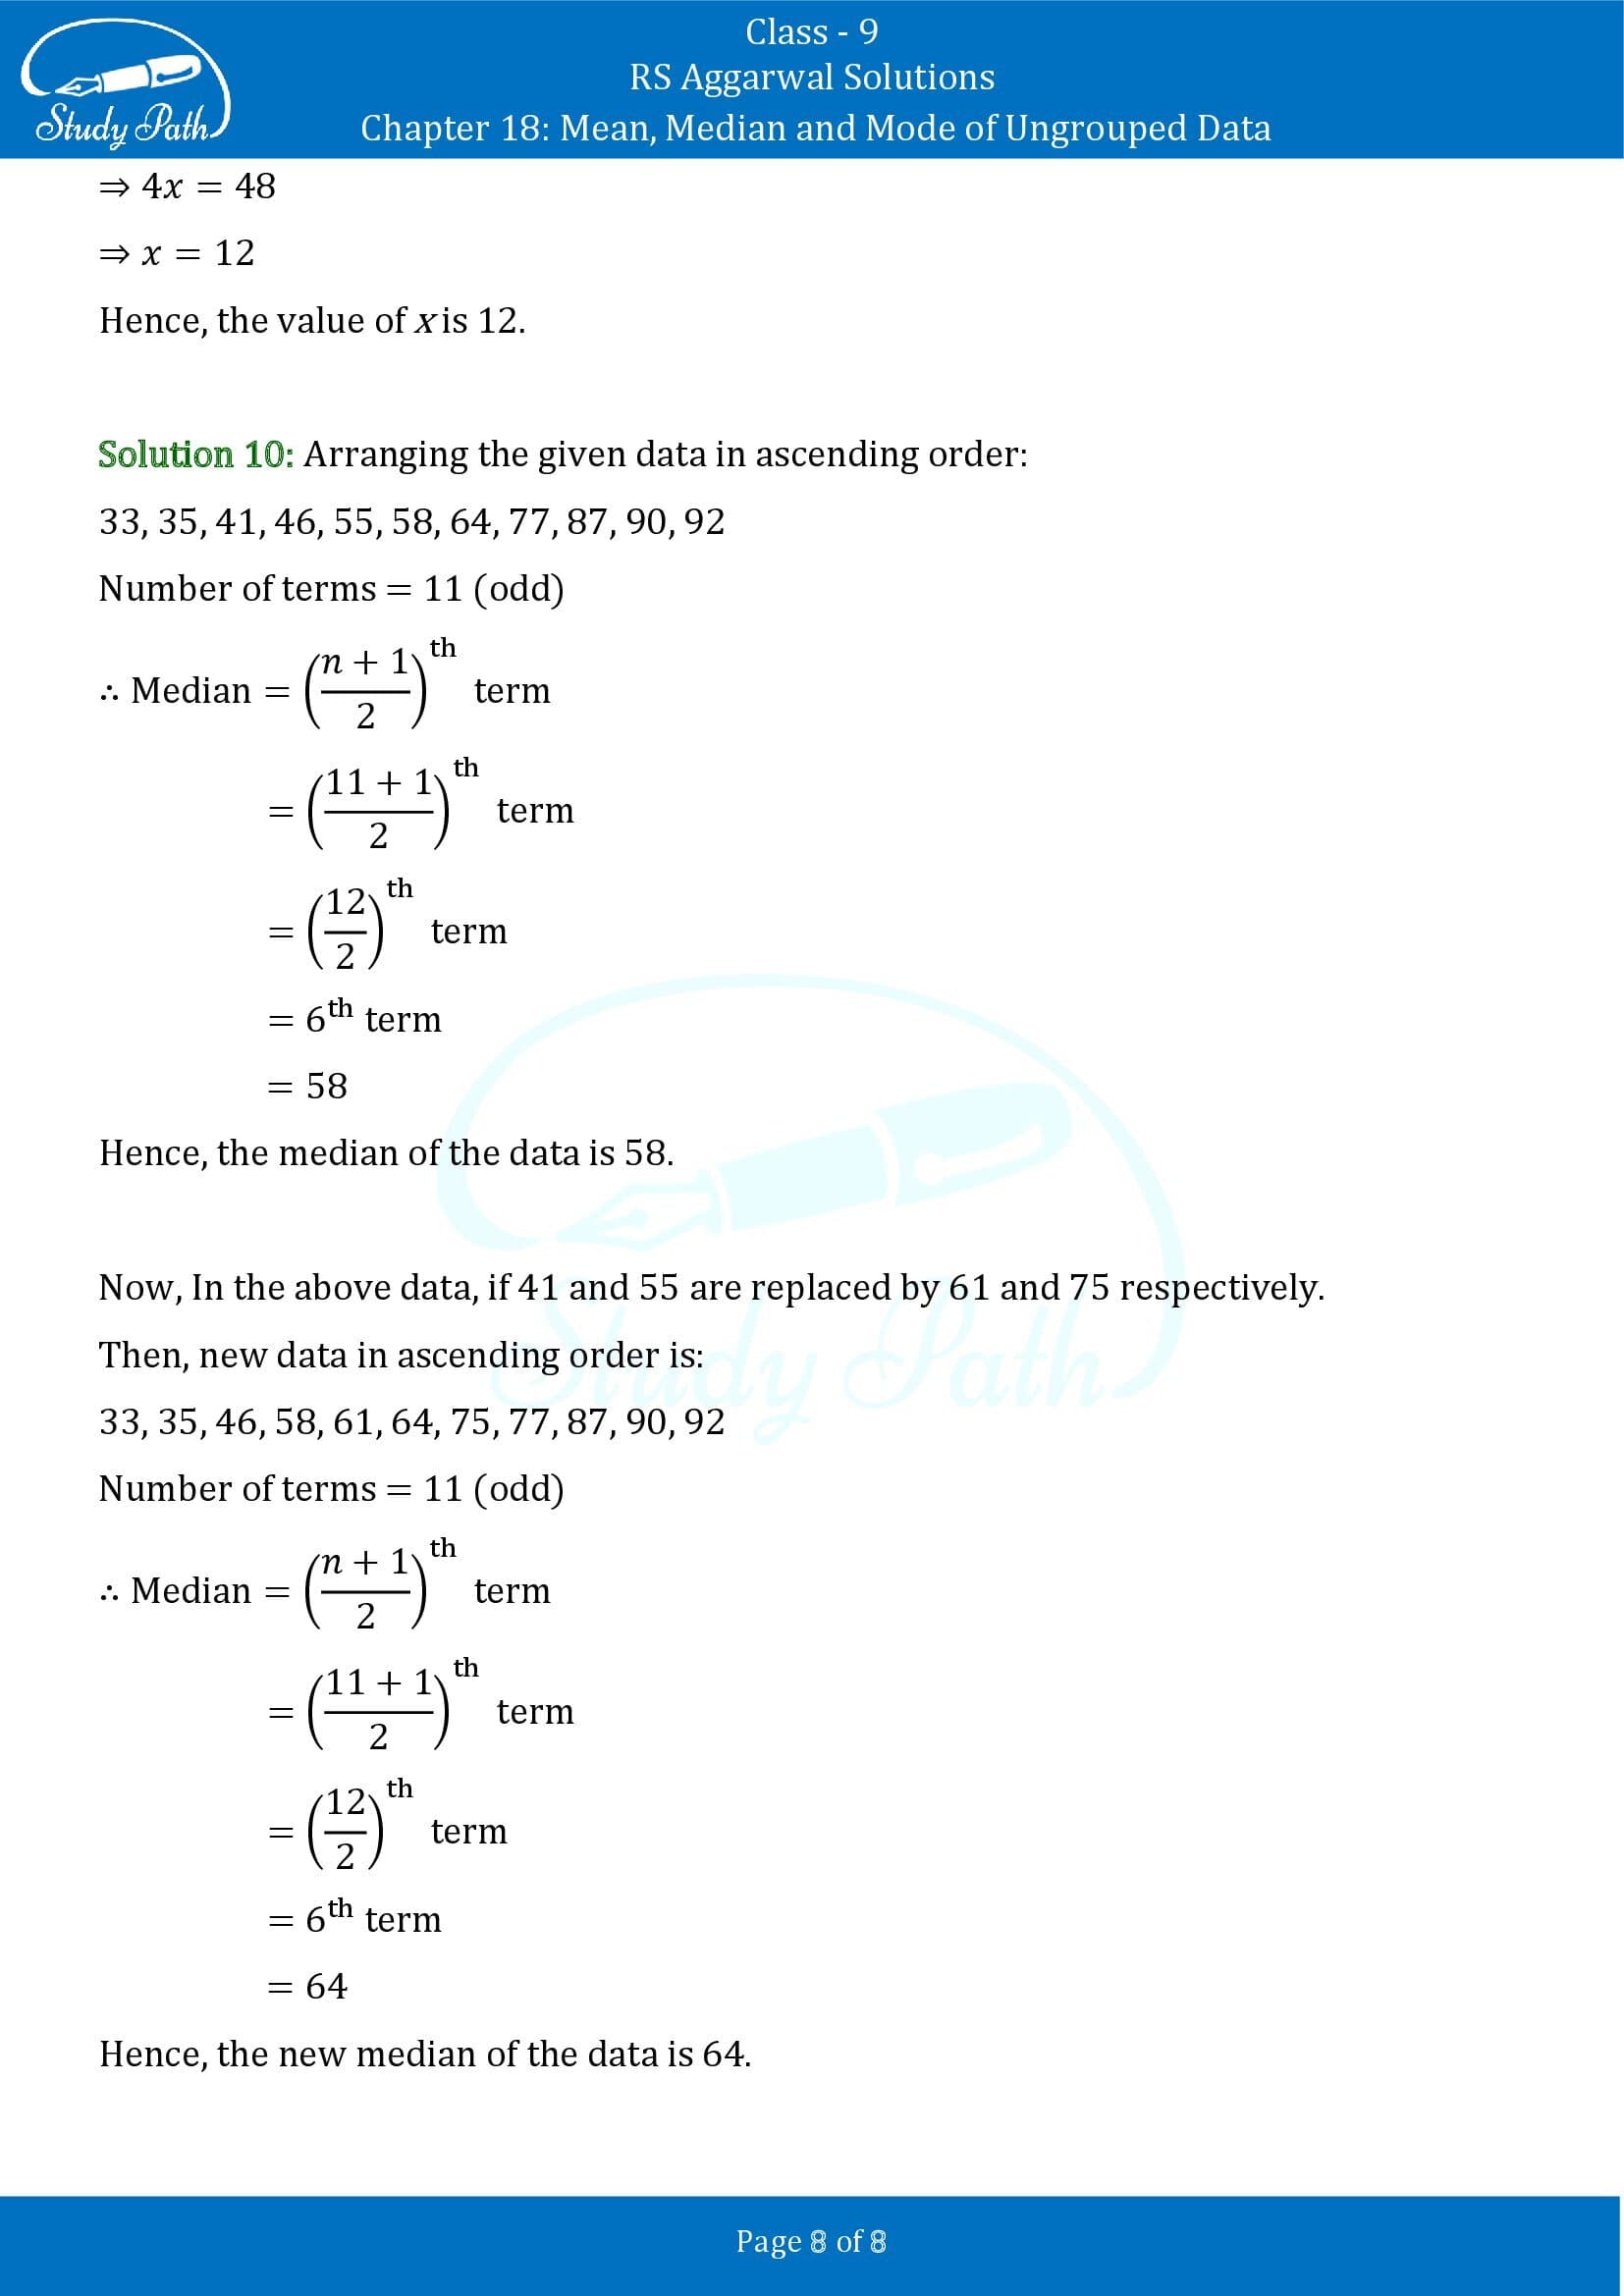 RS Aggarwal Solutions Class 9 Chapter 18 Mean Median and Mode of Ungrouped Data Exercise 18C 0008